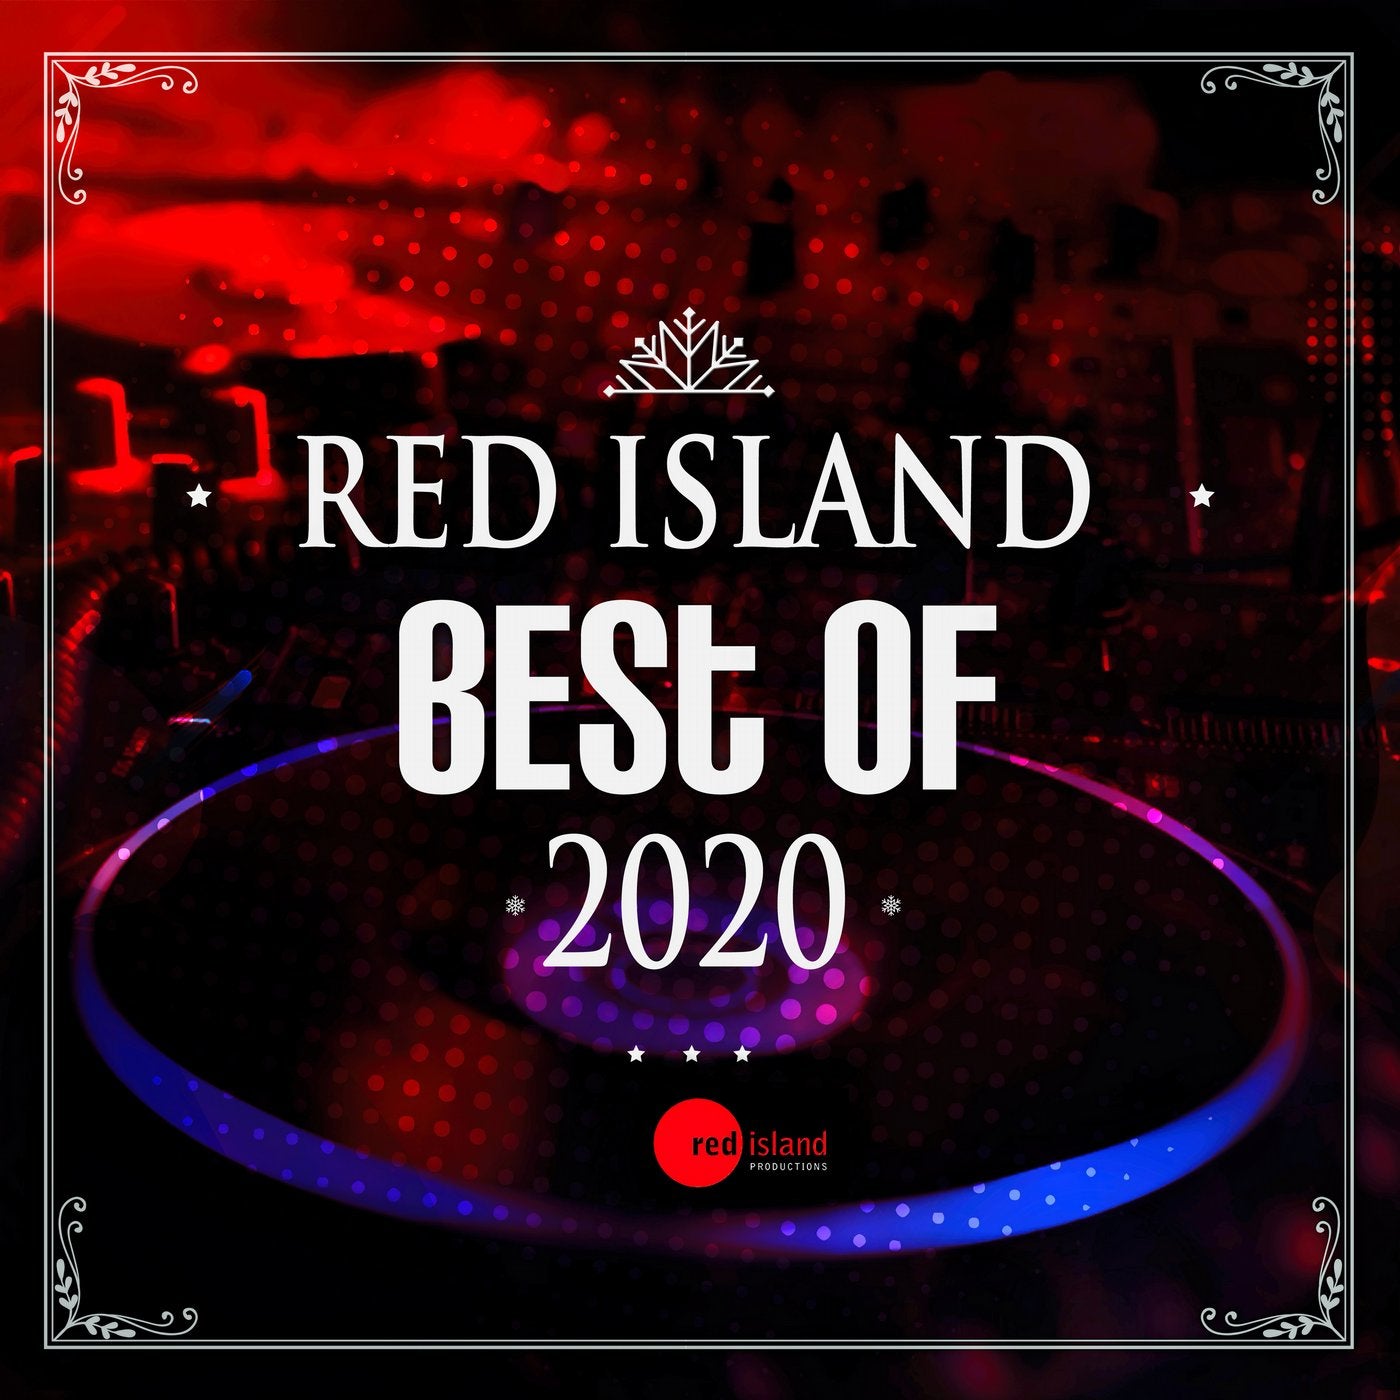 Red Island Best of 2020